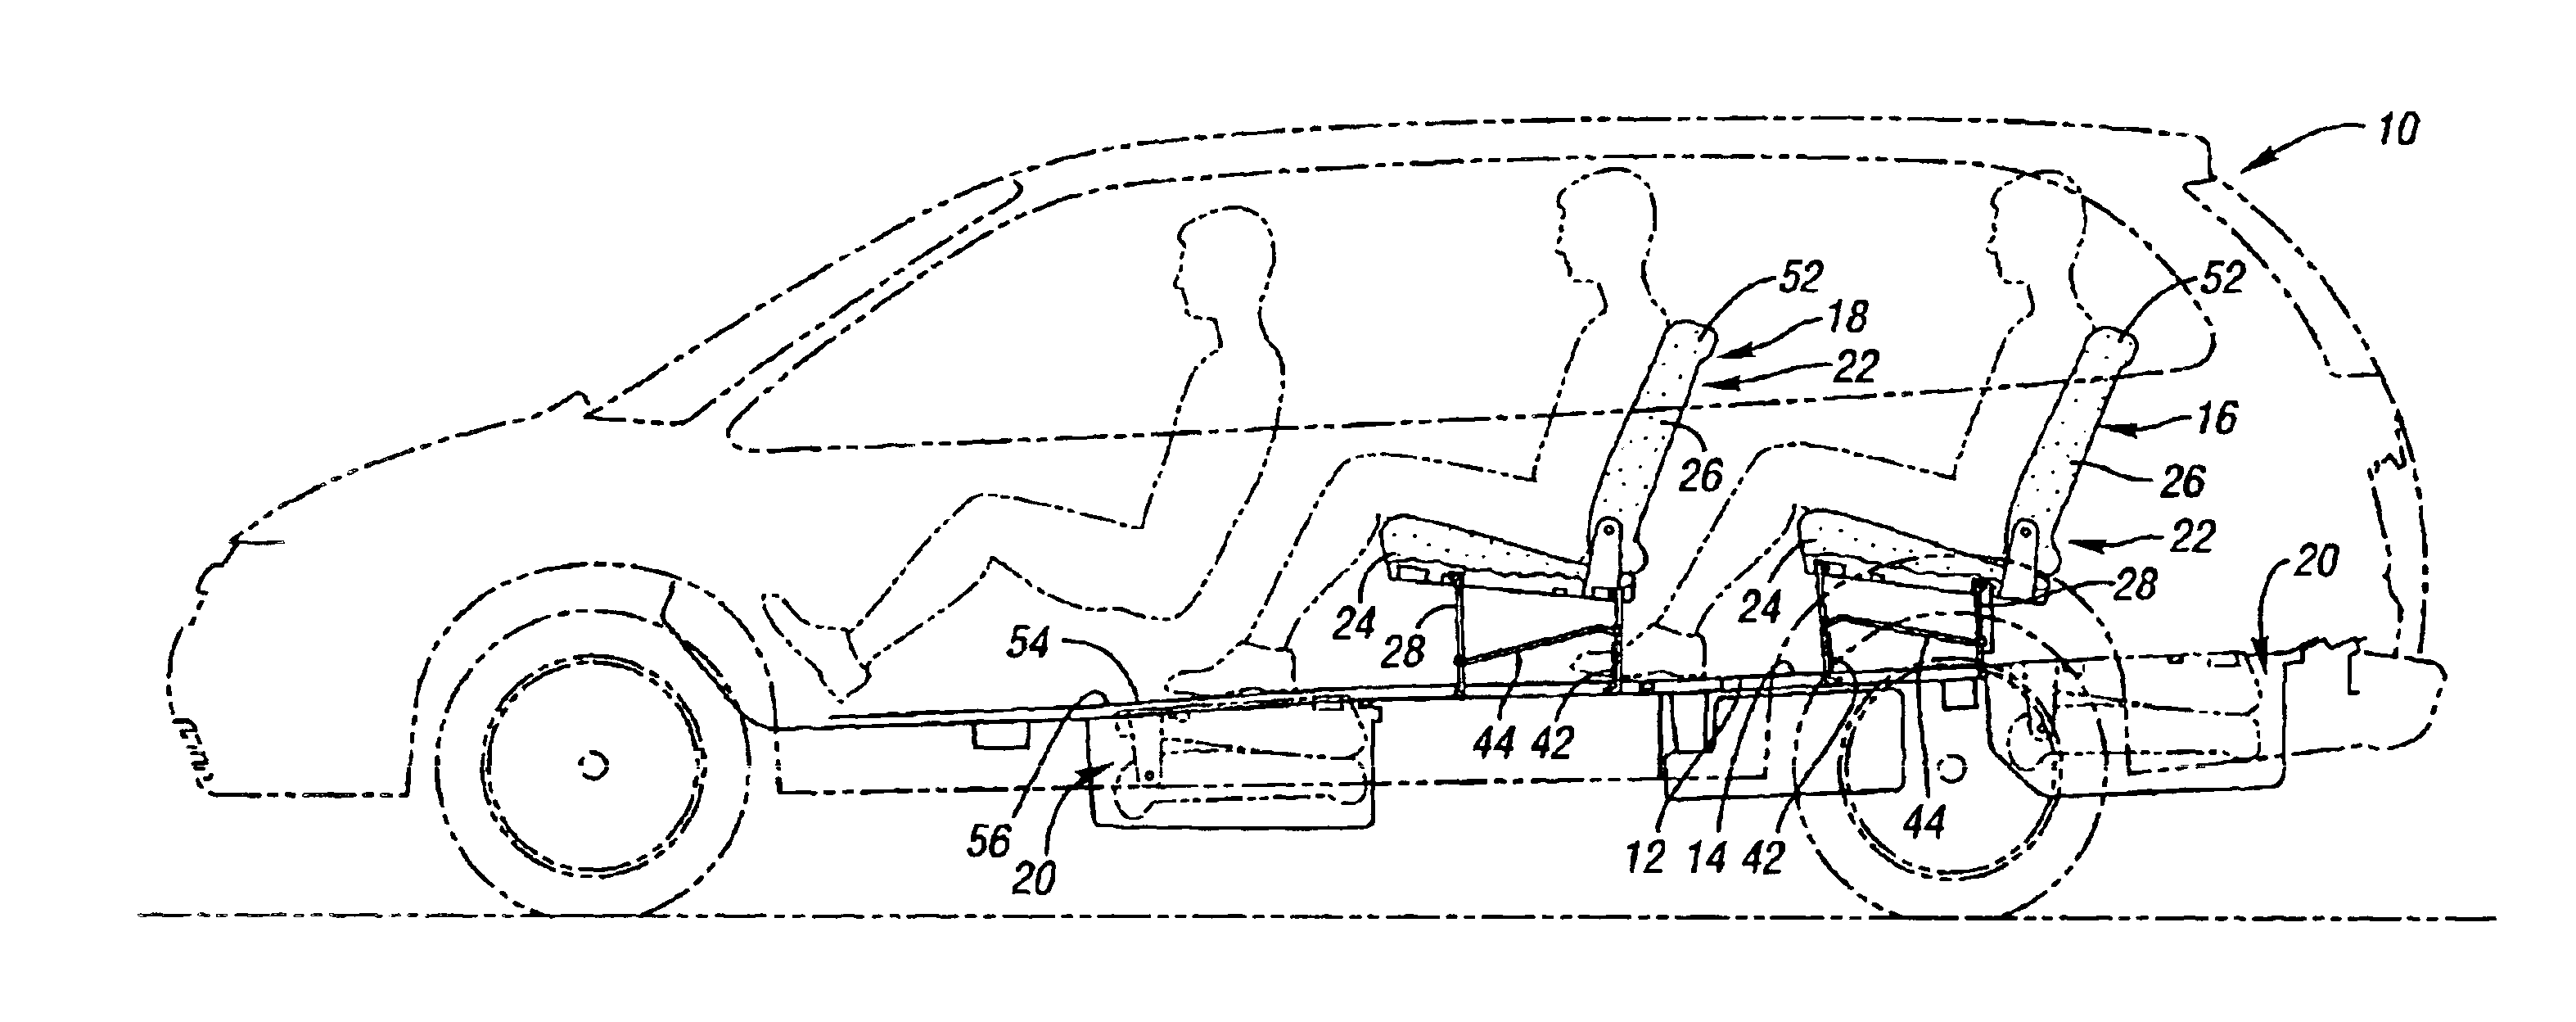 Underfloor stowage of a folding seat in a vehicle